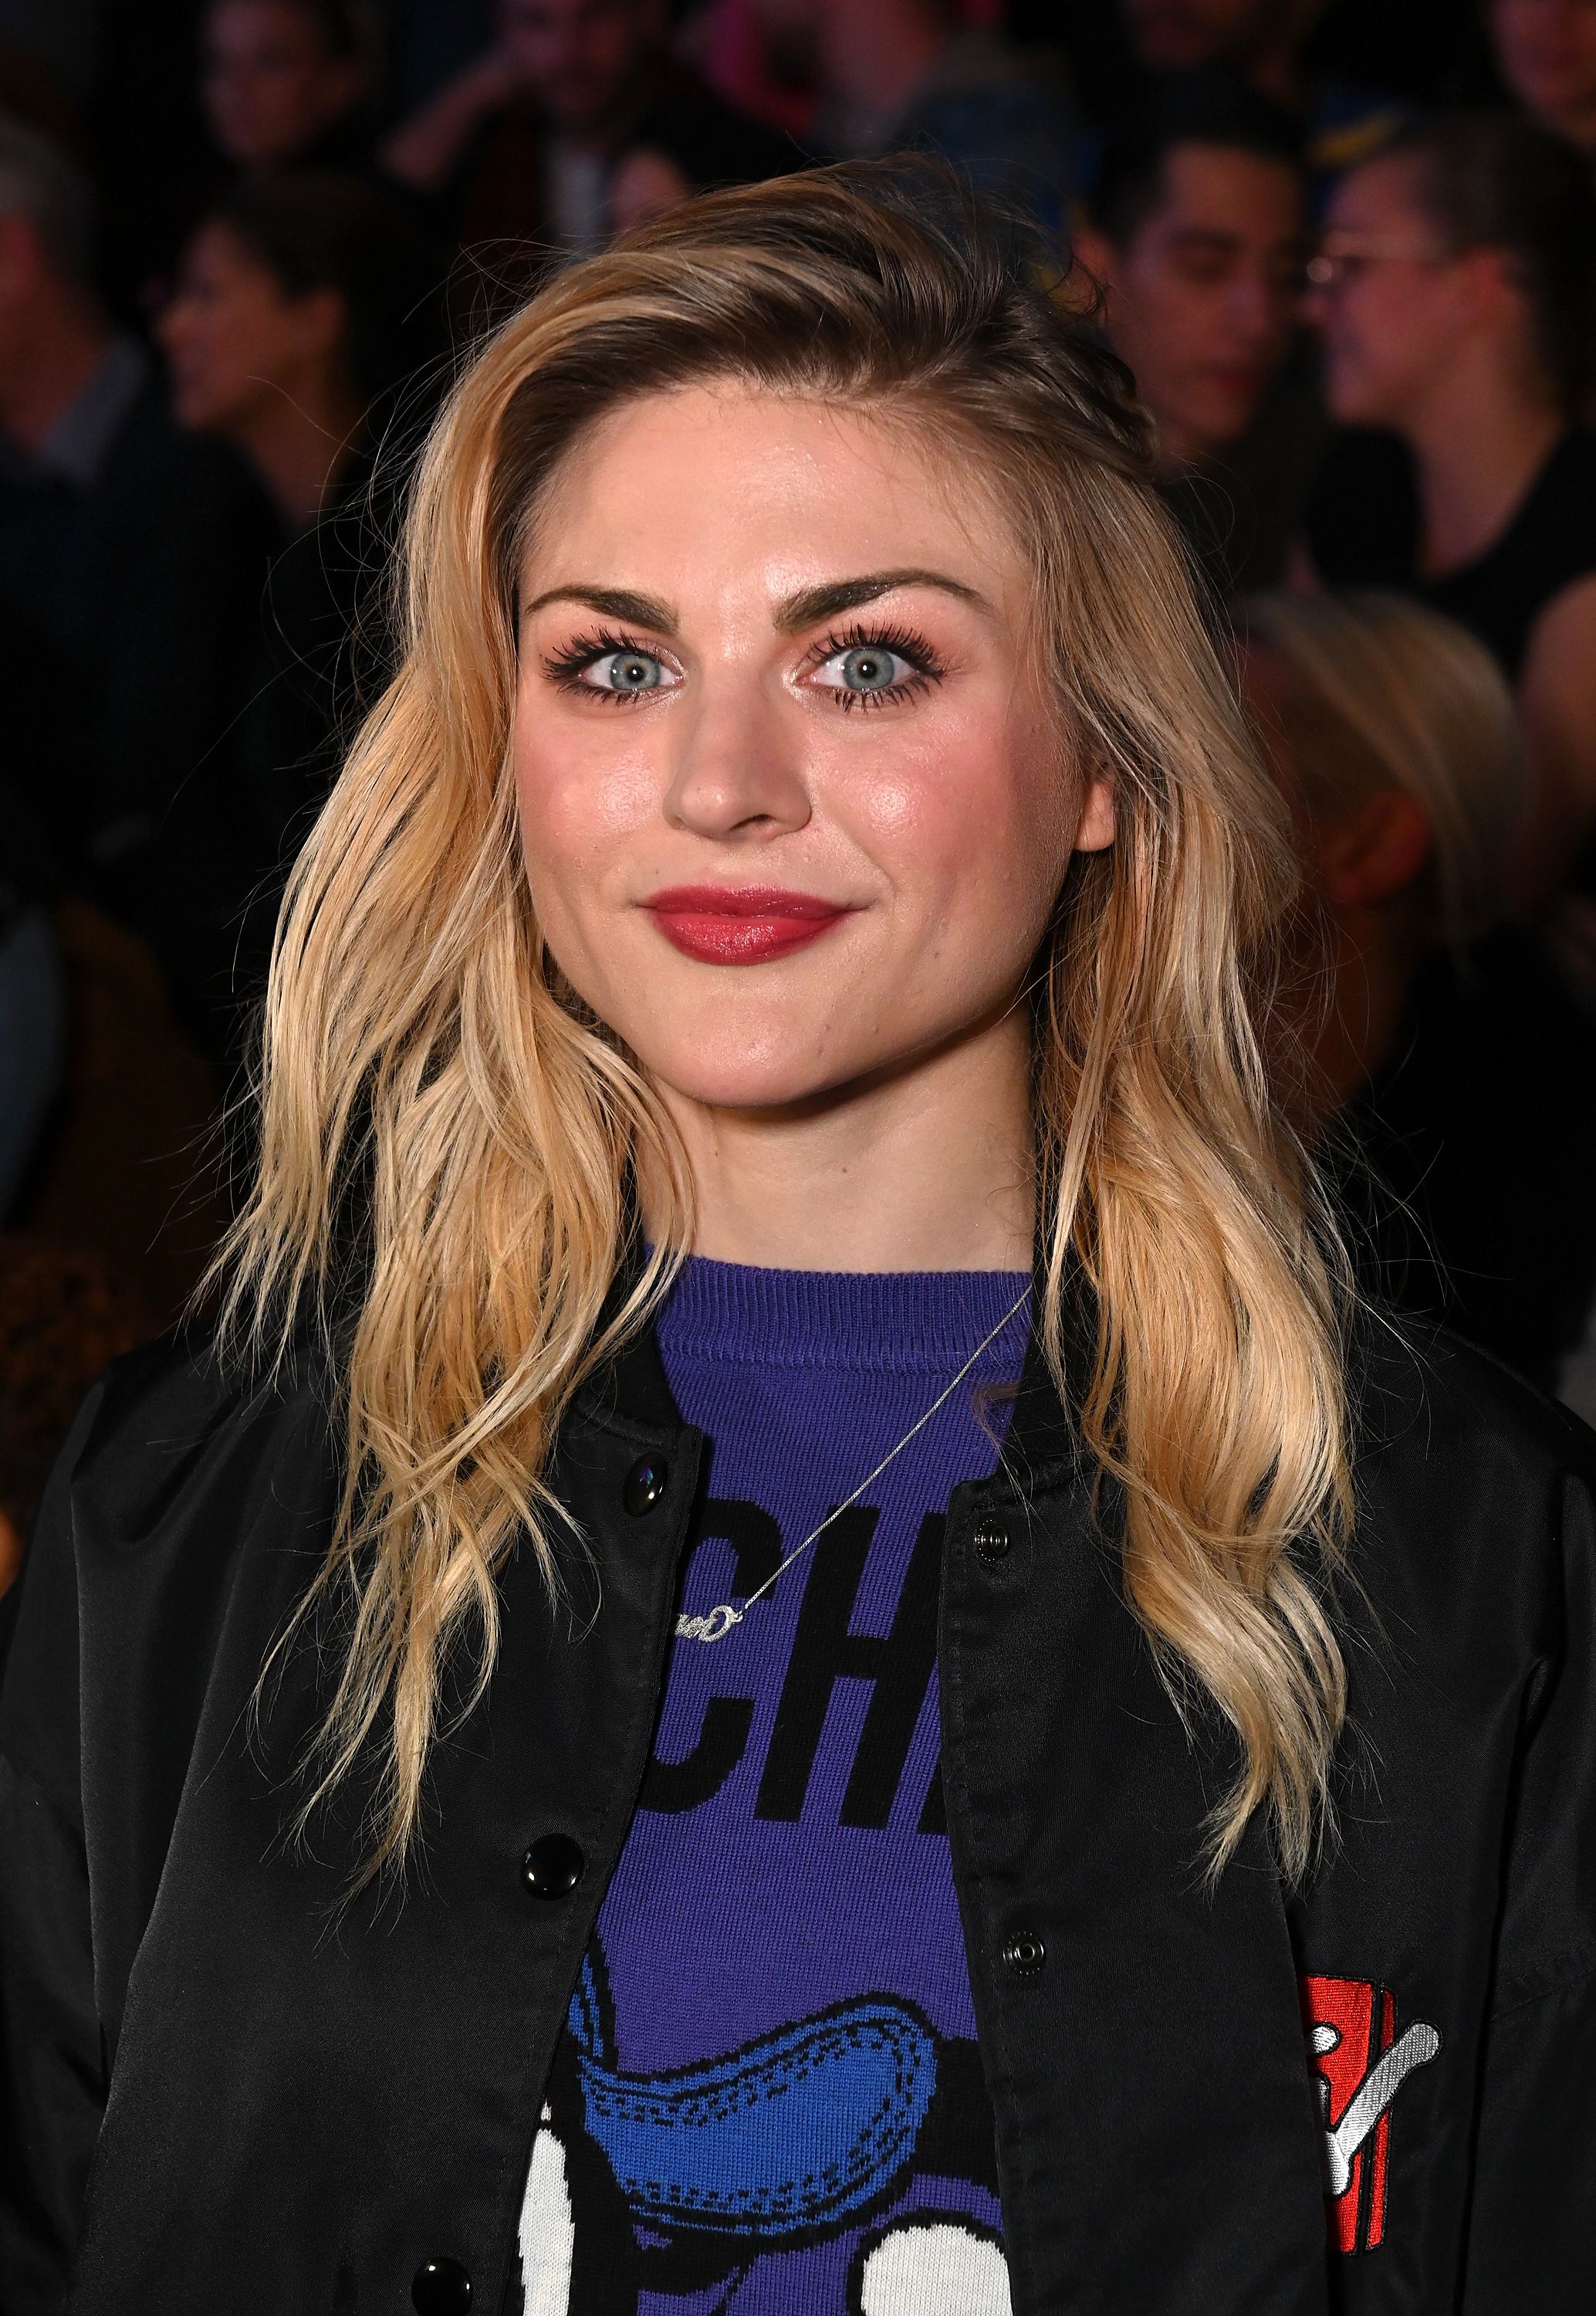 Frances Cobain during the Moschino x H&M at Pier 36 on October 24, 2018, in New York City. | Source: Getty Images